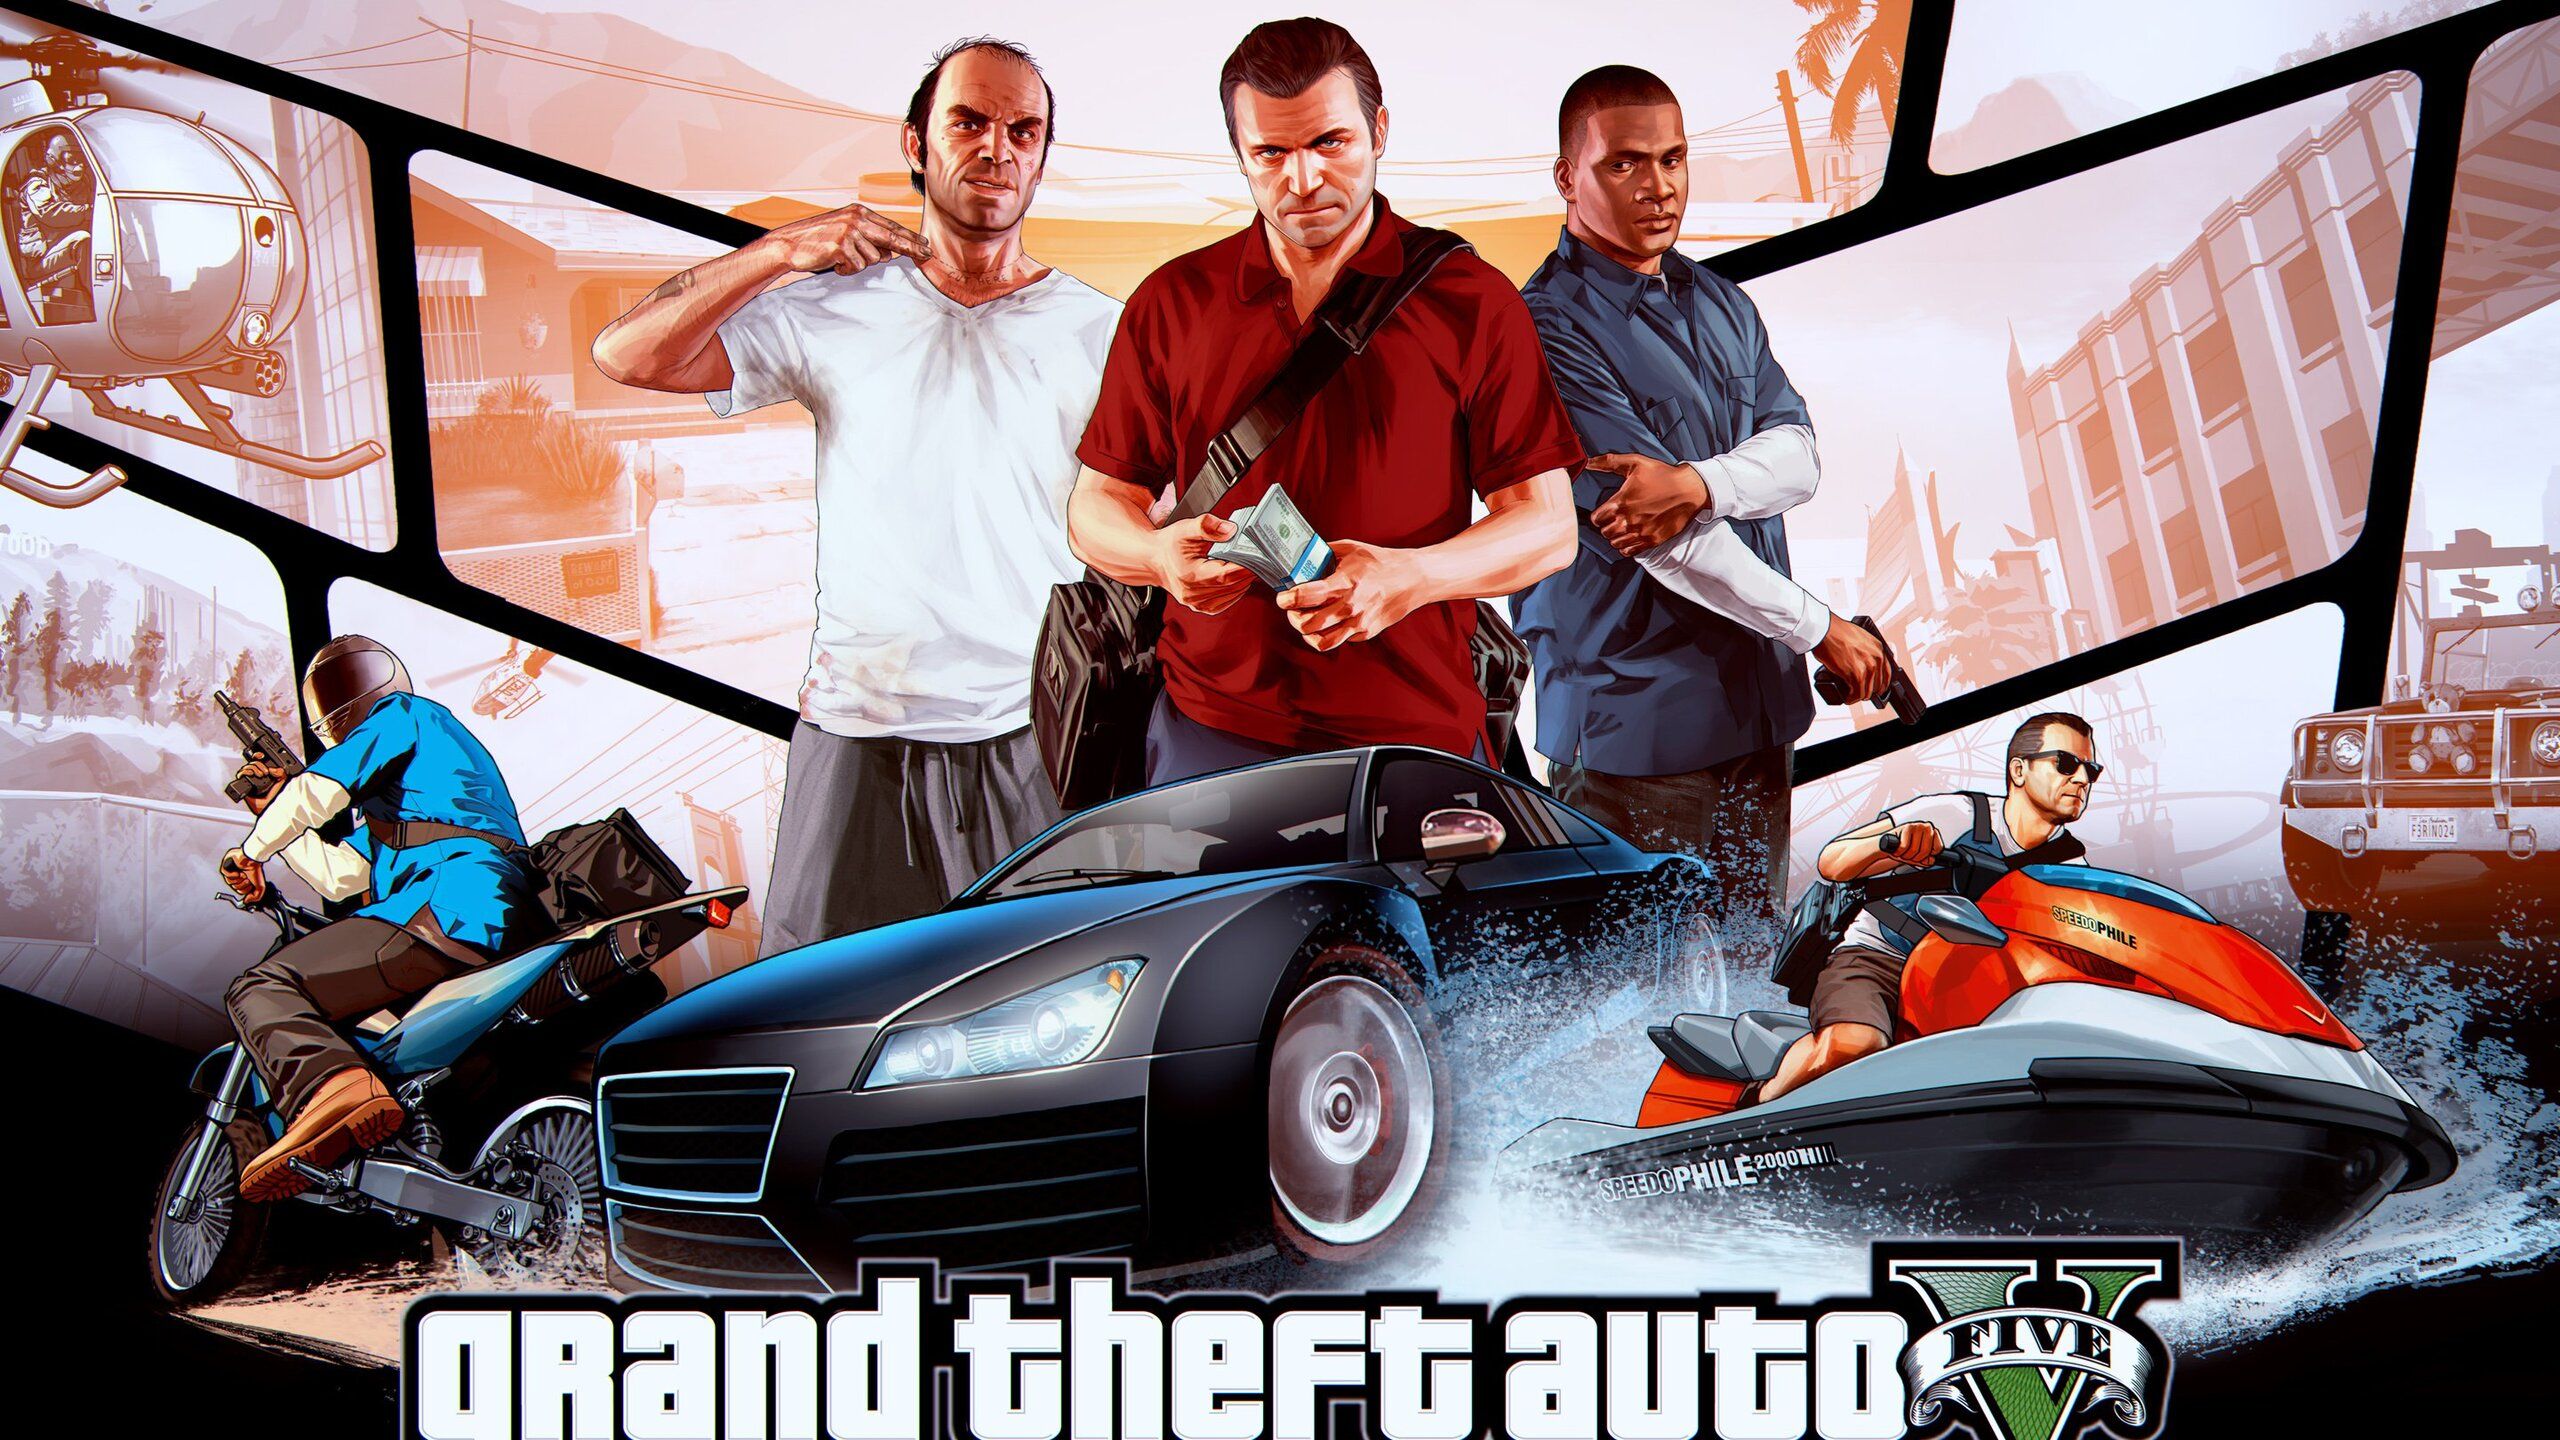 Grand Theft Auto V HD 1440P Resolution HD 4k Wallpaper, Image, Background, Photo and Picture